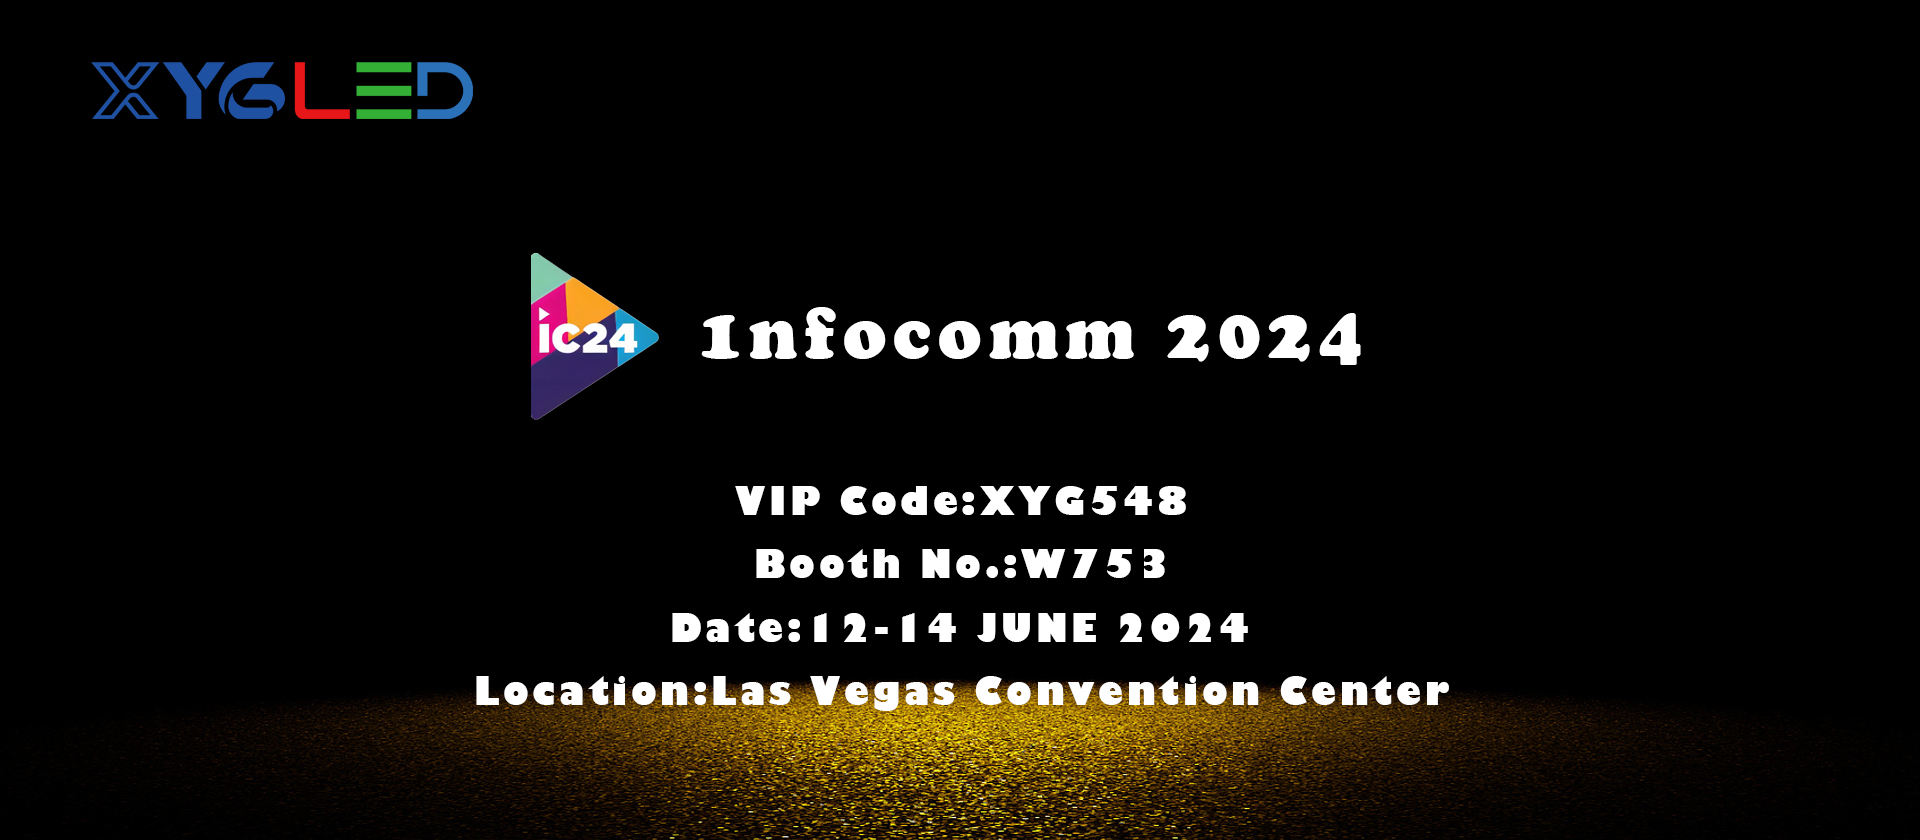 2024 infocomm exhibitor XYGLED-xin yi guang leading brand of led floor screen